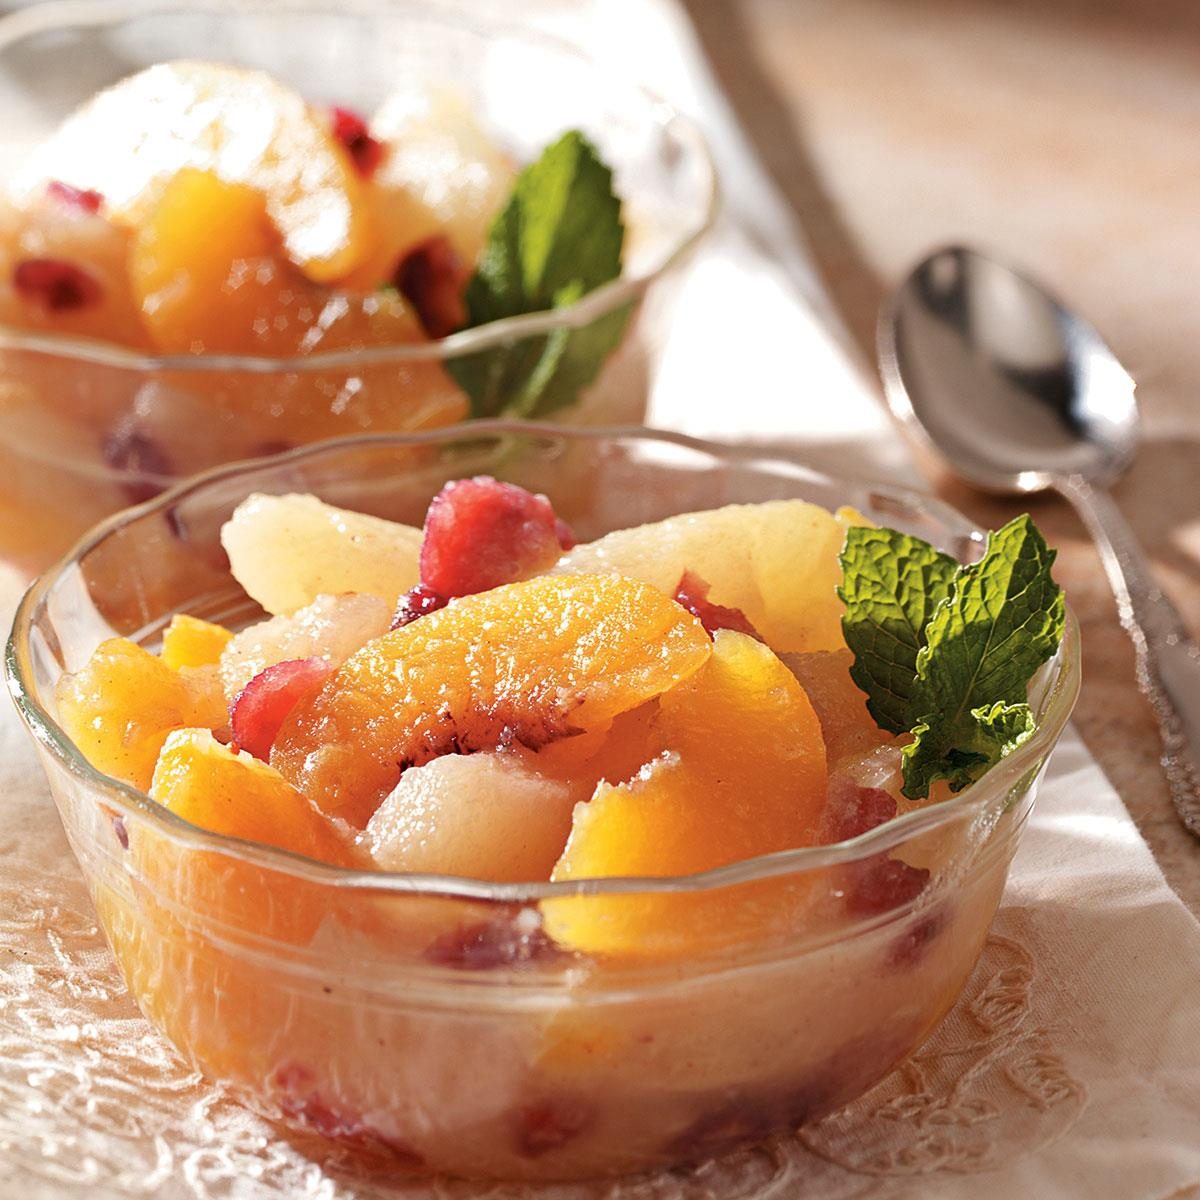 Slow-Cooked Hot Fruit Salad